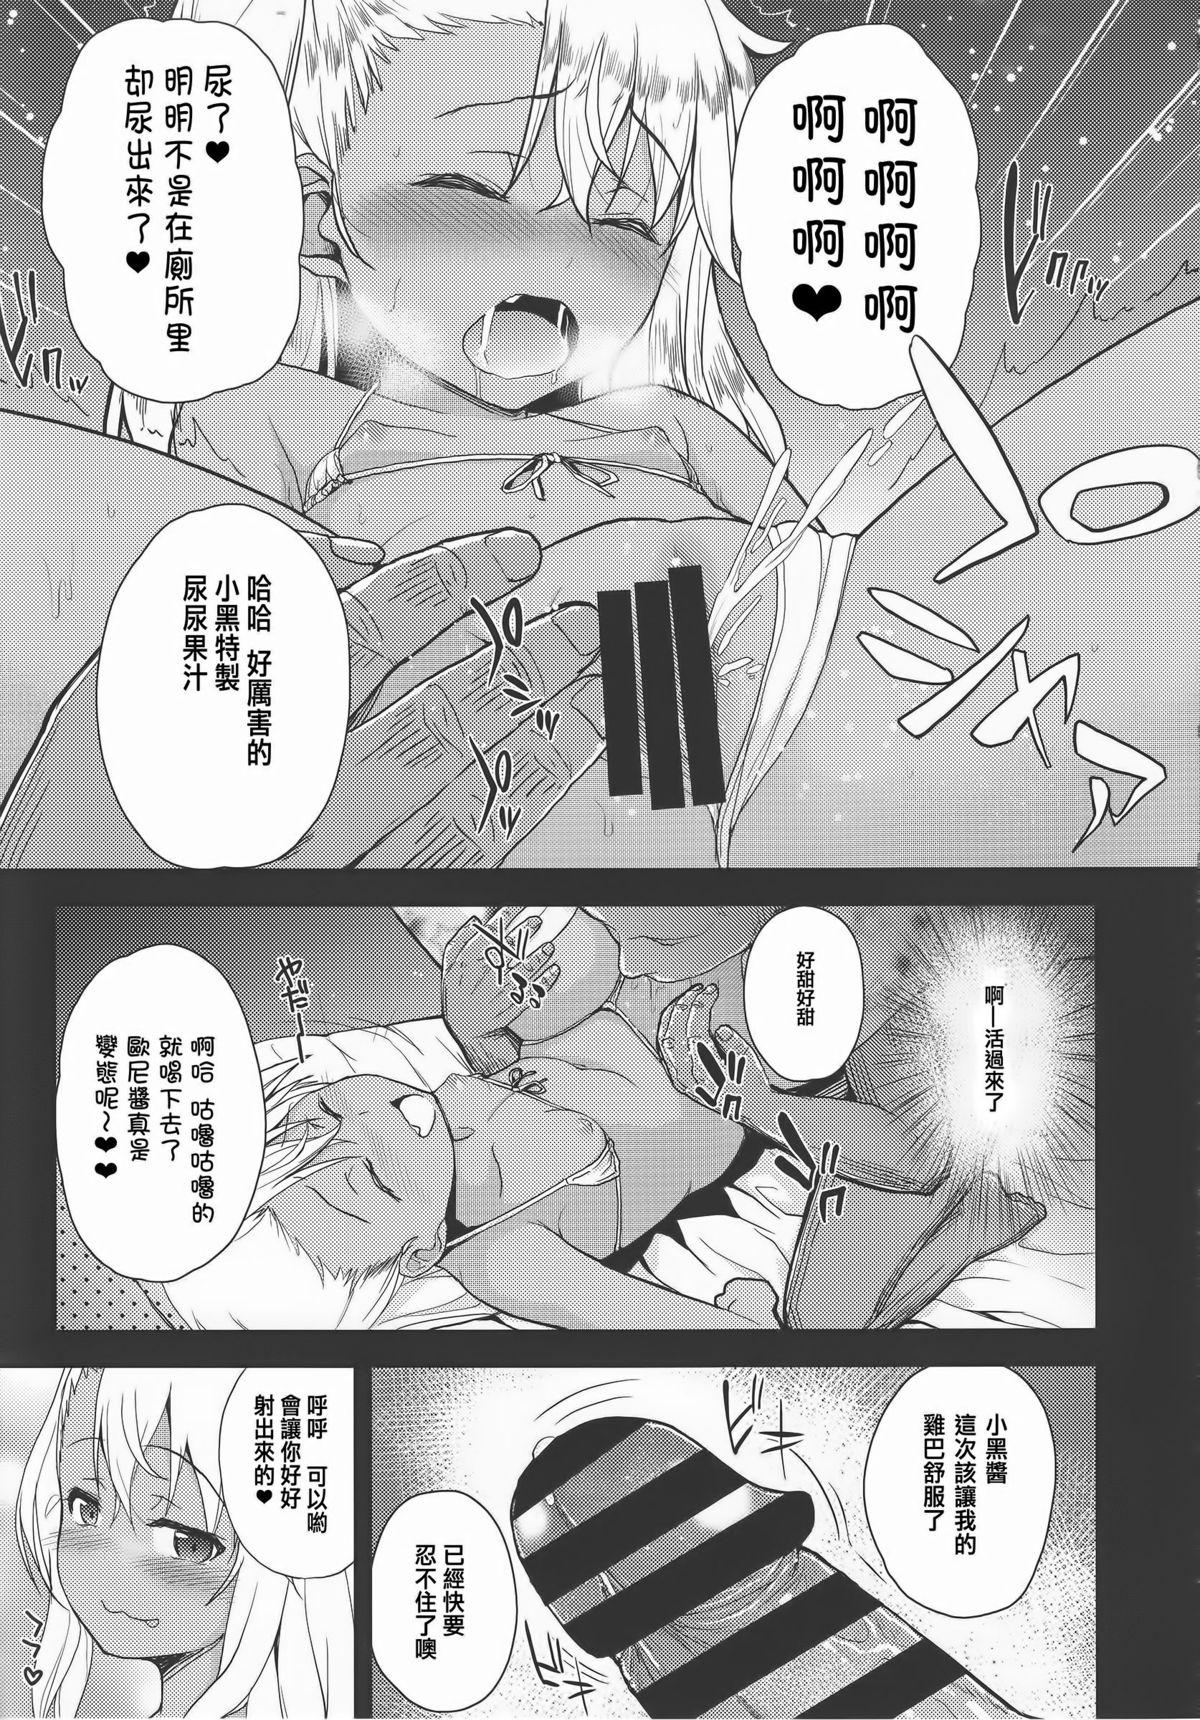 College Chloe-chan no Iru Omise - Fate kaleid liner prisma illya Rimming - Page 9